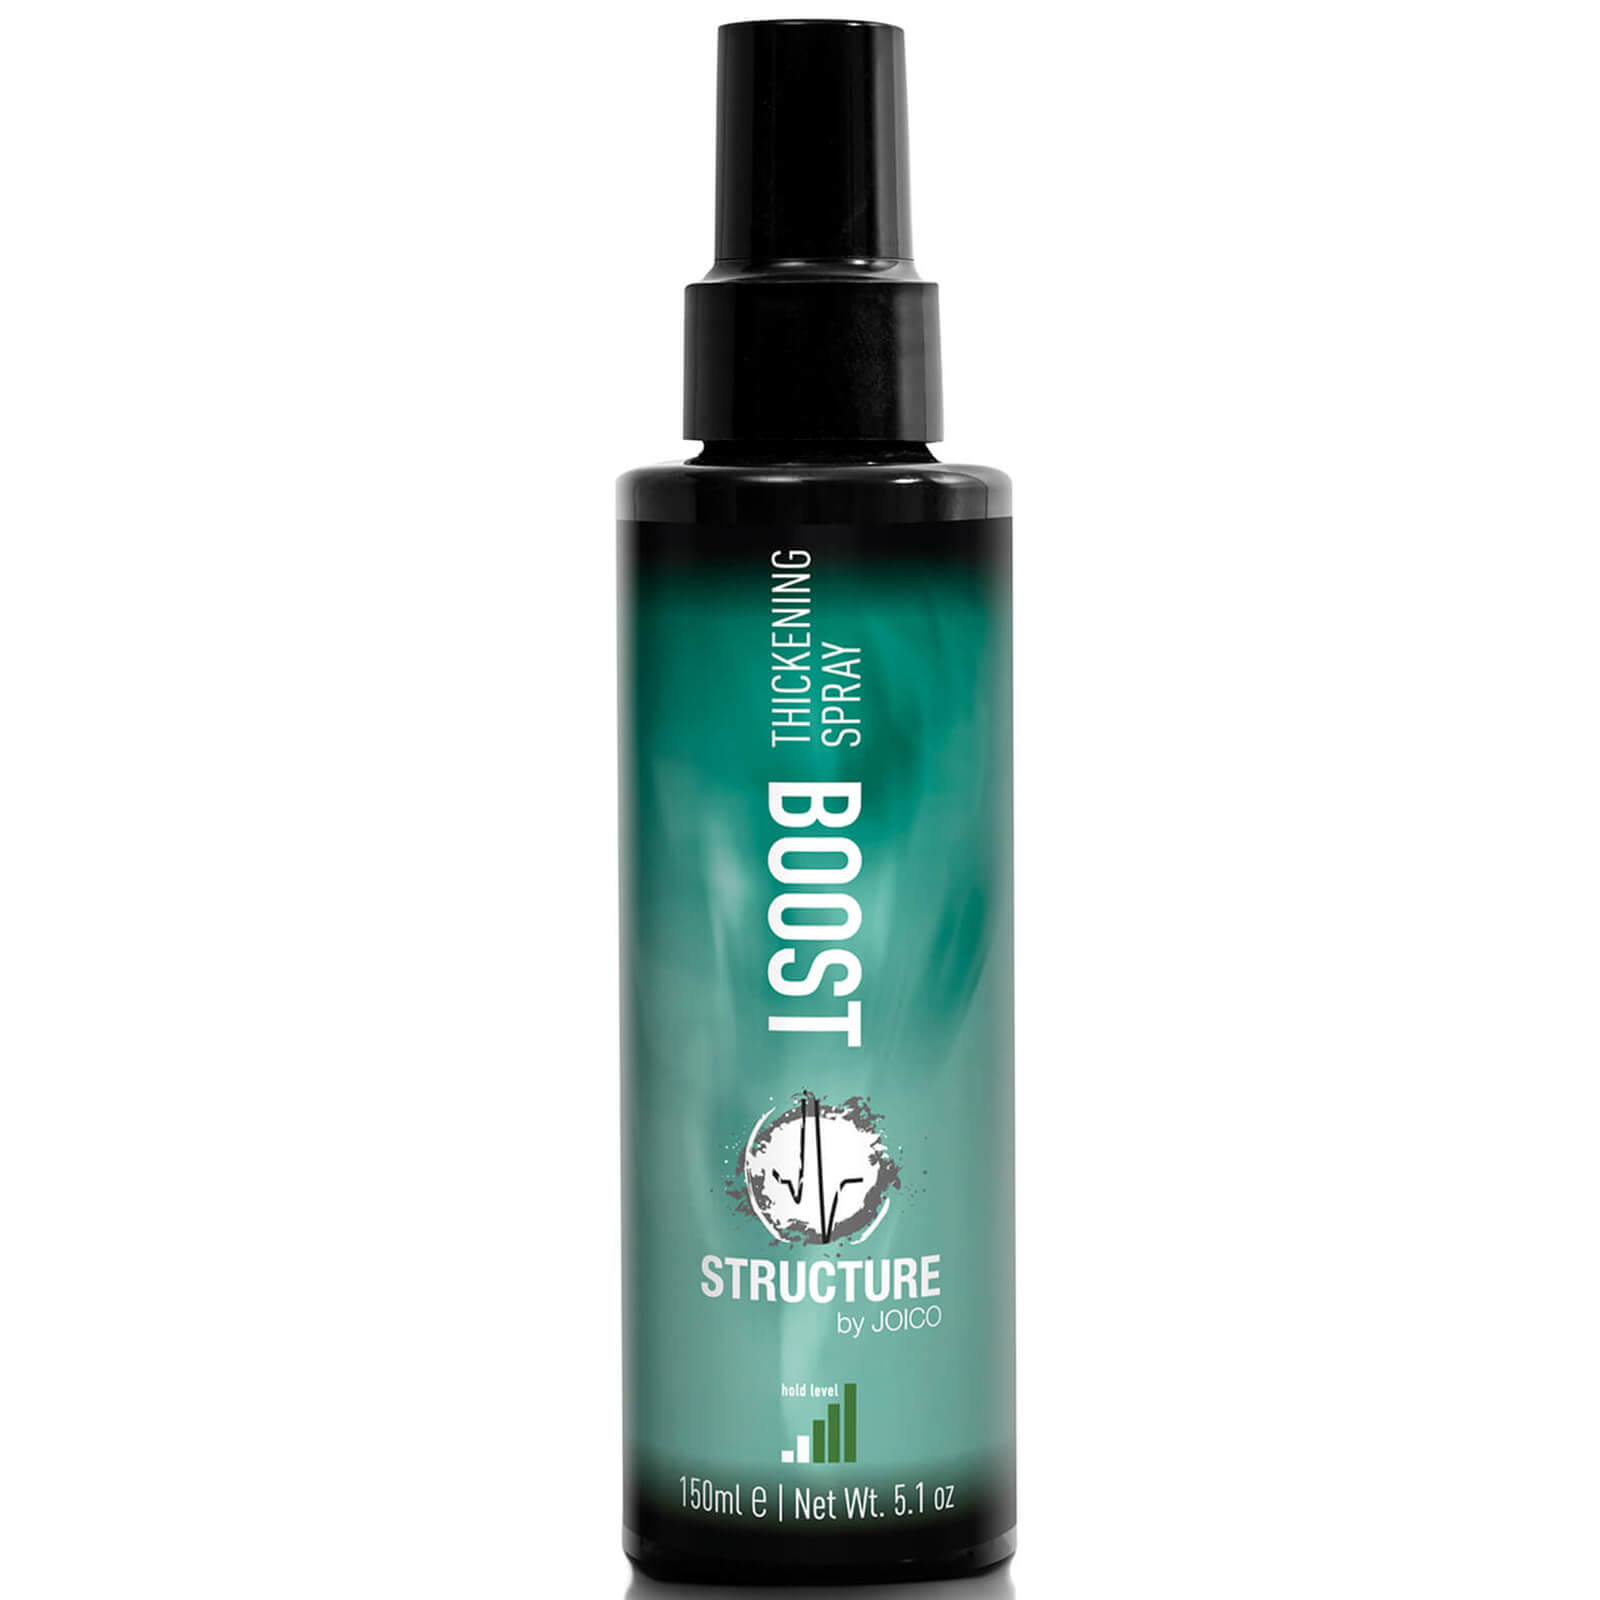 Joico Structure Boost Thickening Spray 150ml lookfantastic.com imagine